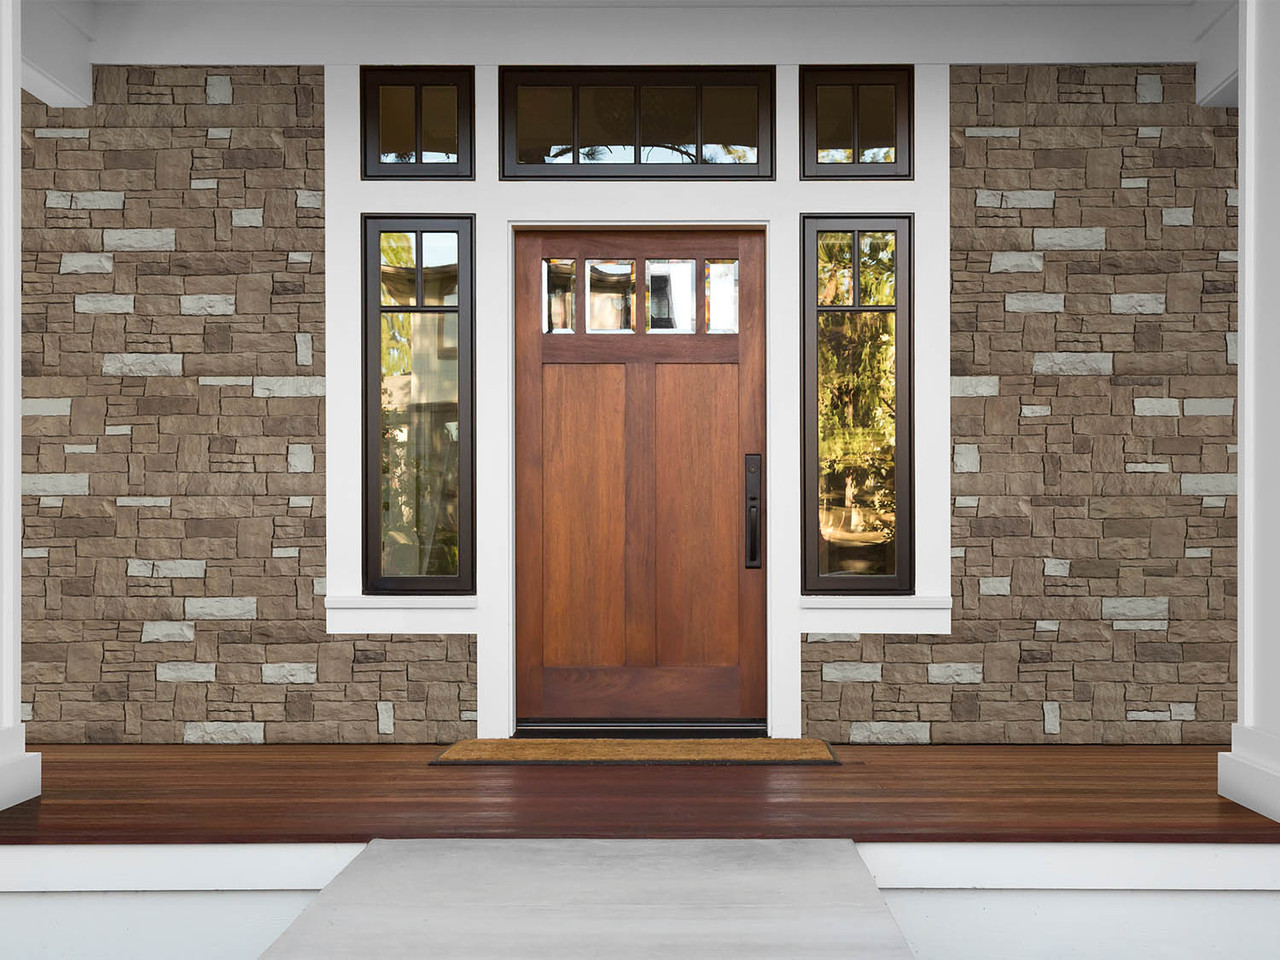 Faux stone siding around the front door and front section of a house